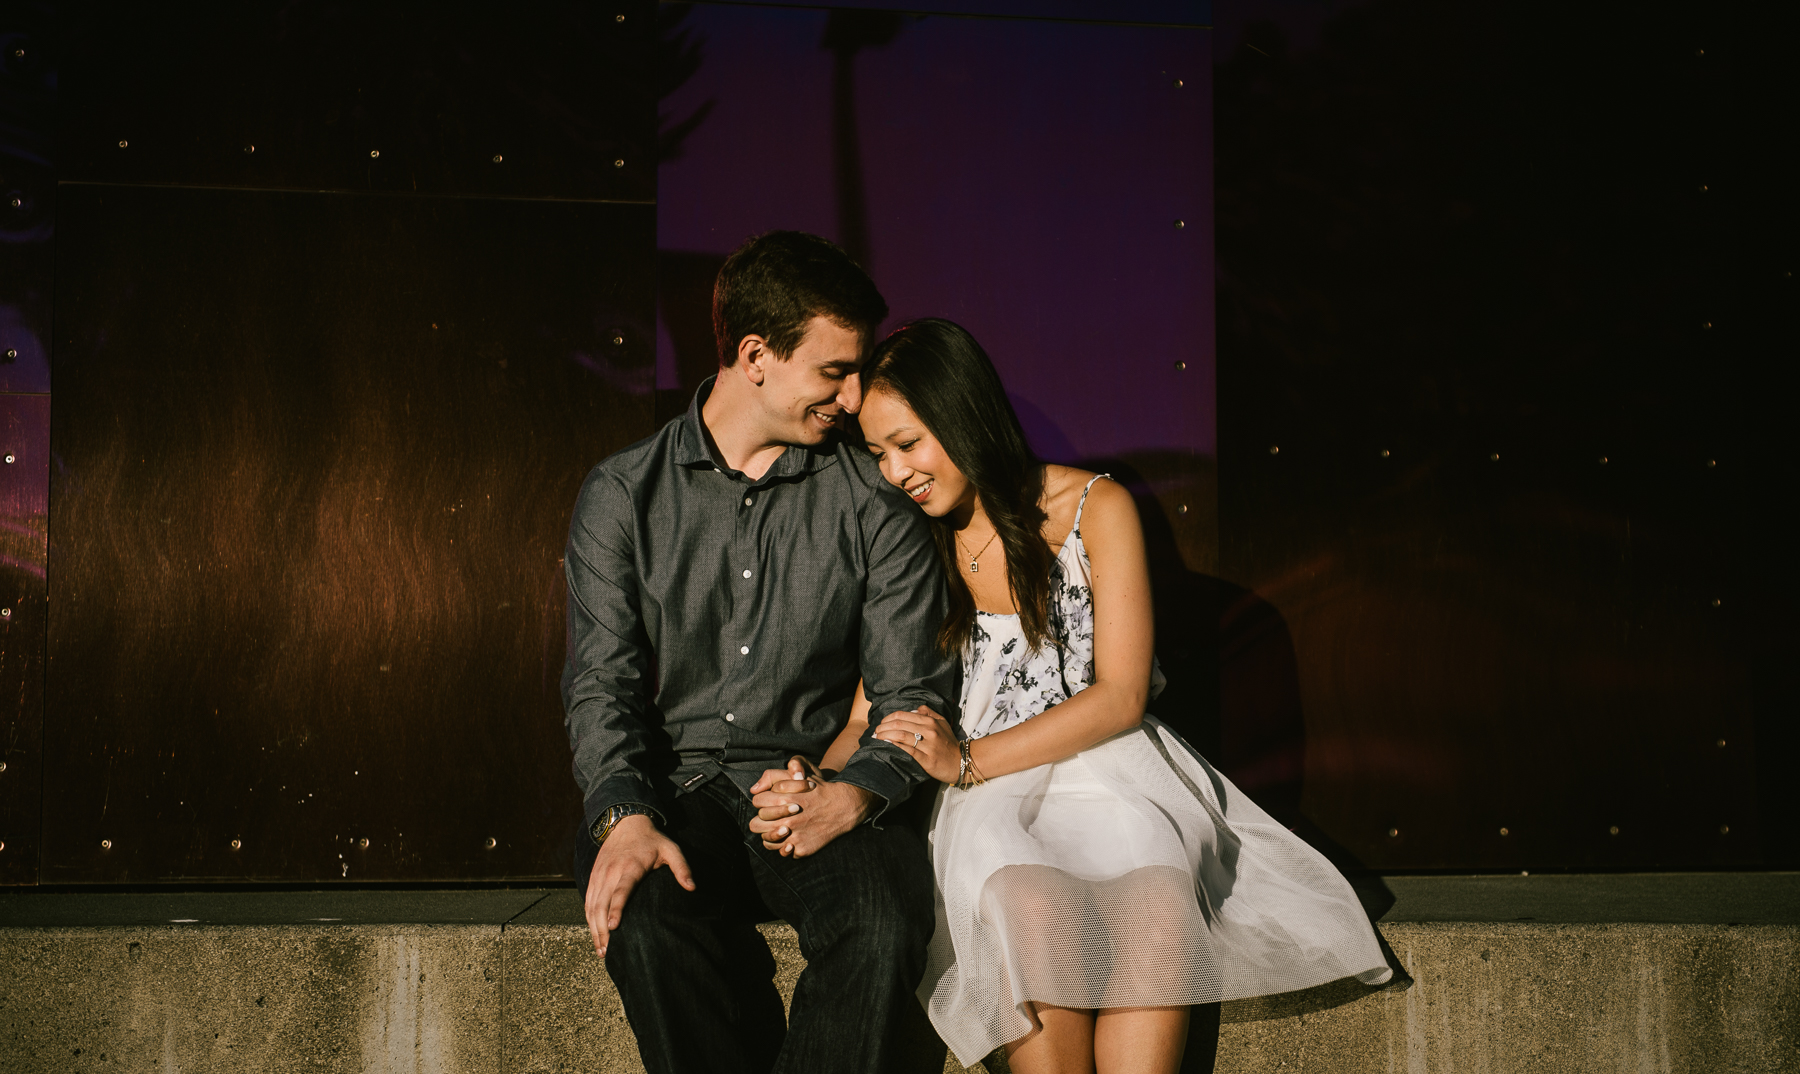 seattle-wedding-photographer-engagement-sessions-best-28